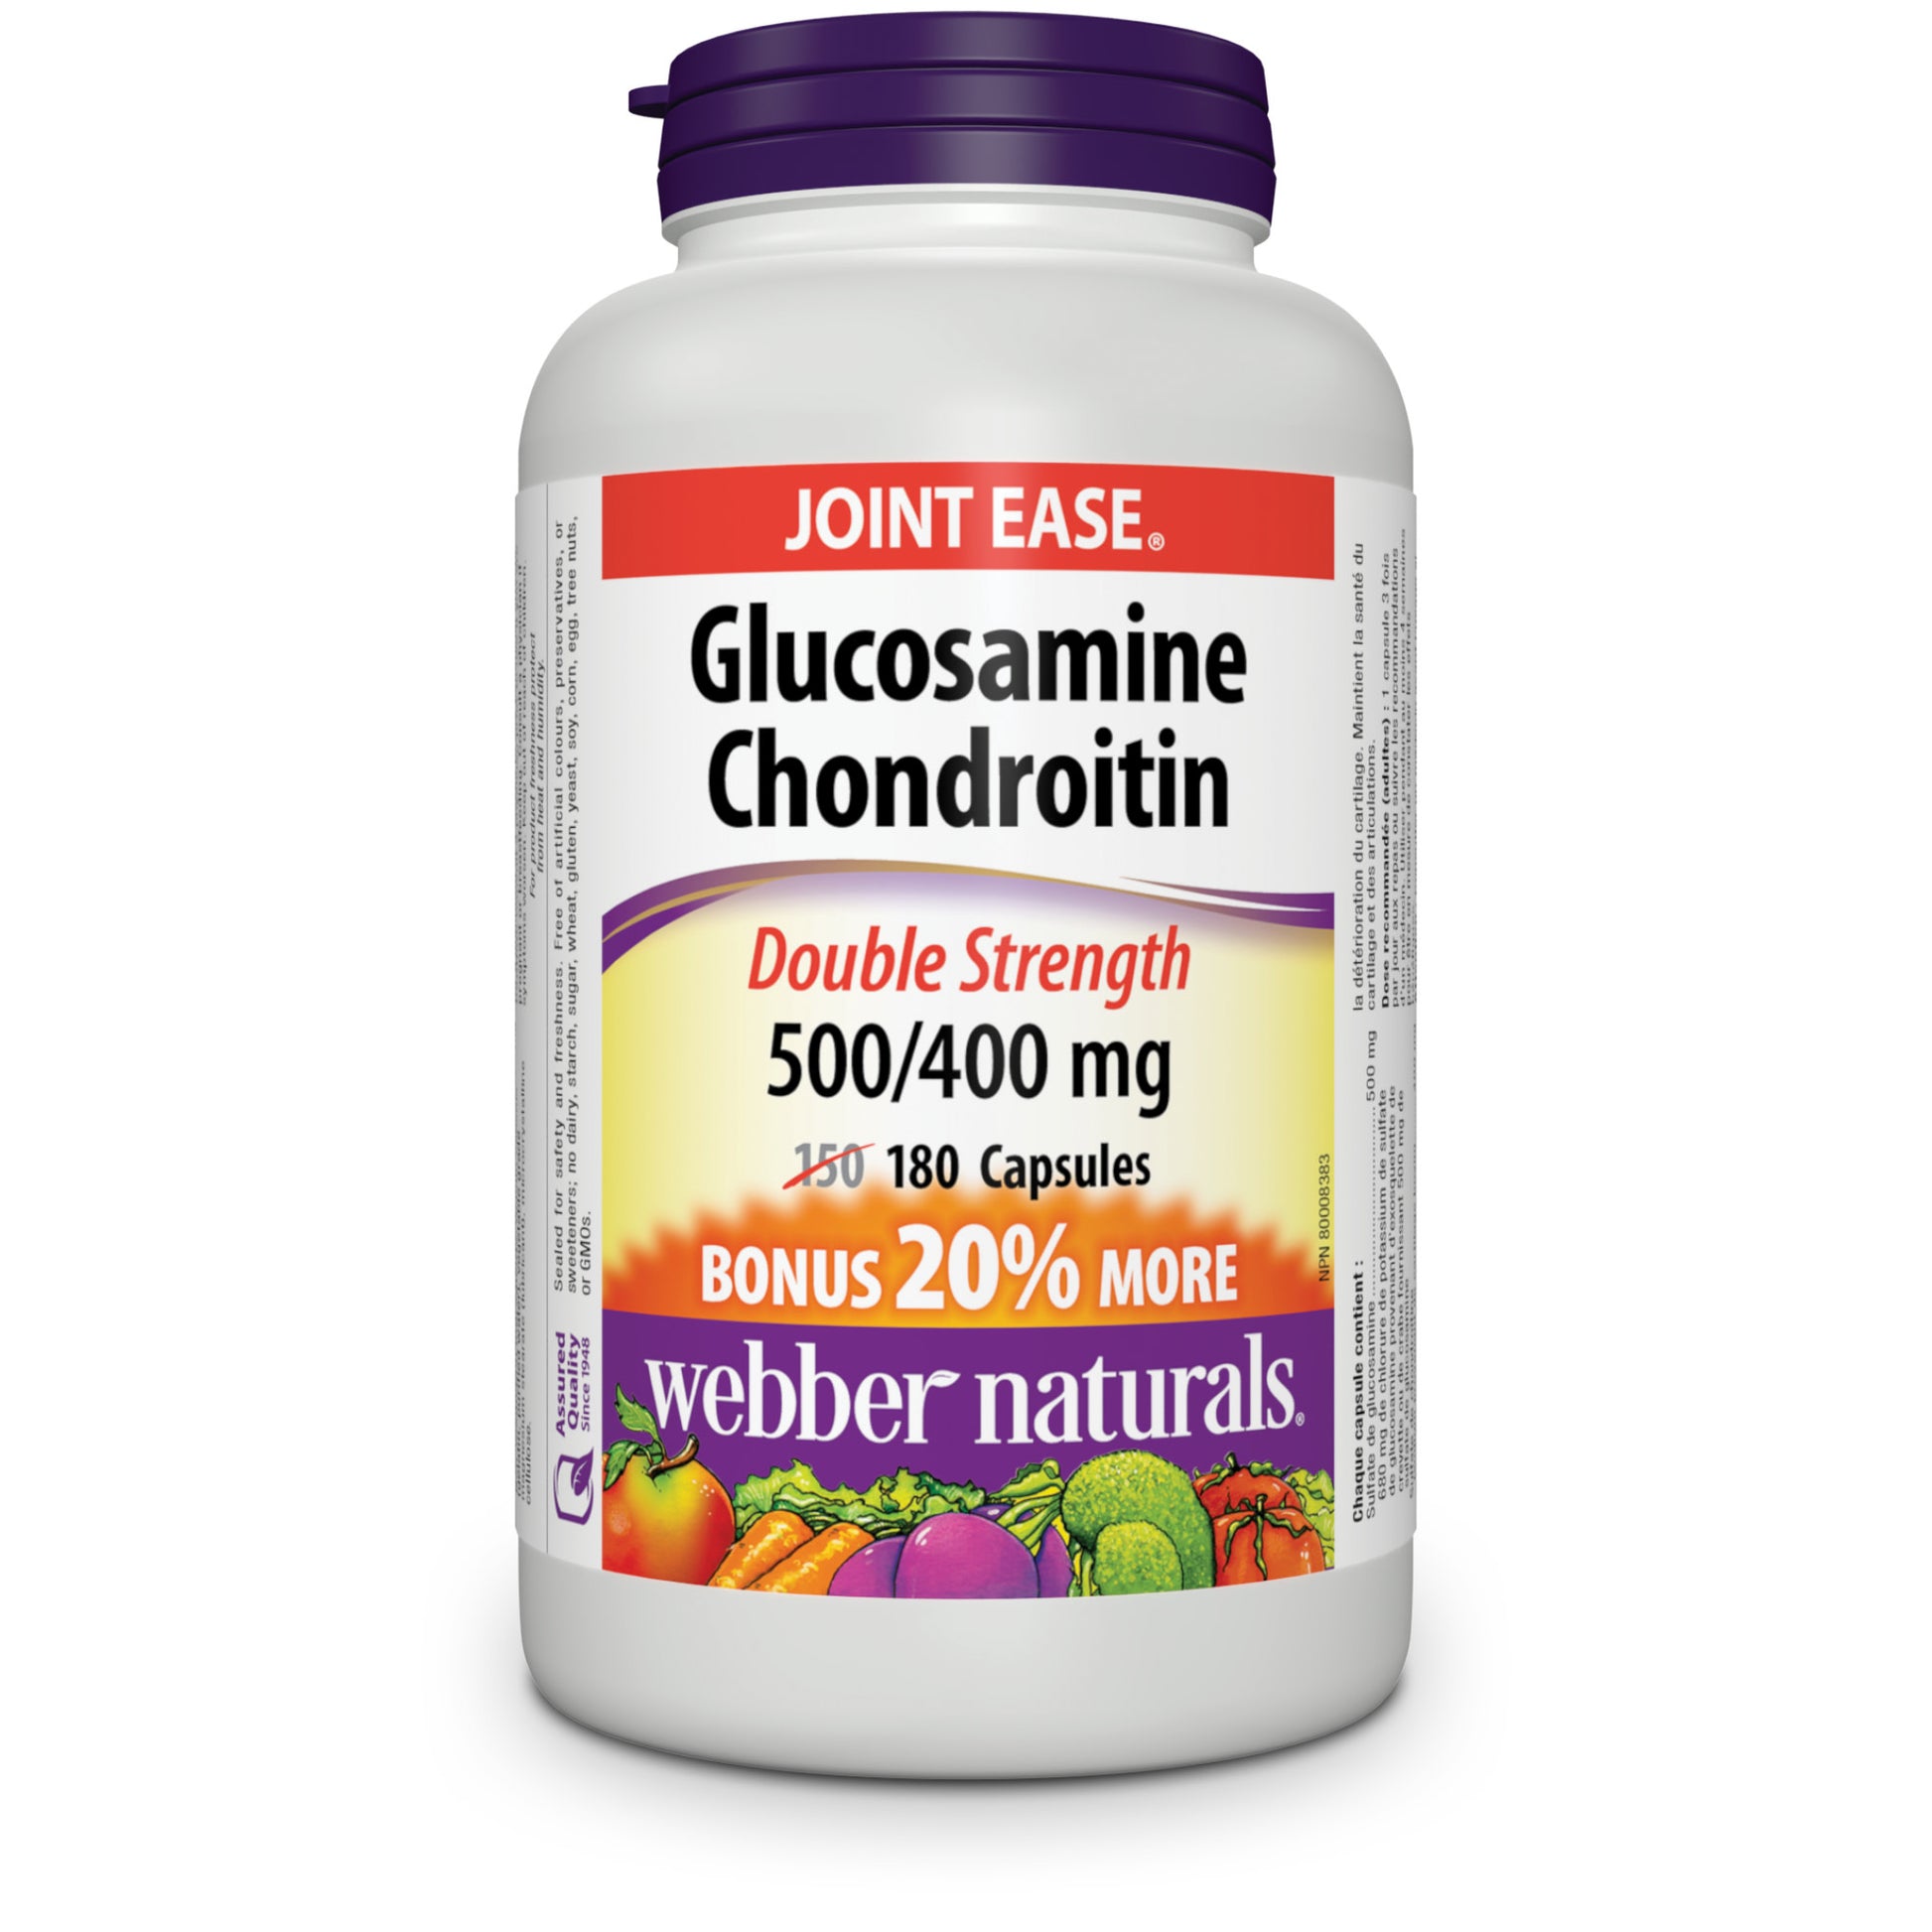 Glucosamine Chondroitin Double Strength 500/400 mg for Webber Naturals|v|hi-res|WN3839